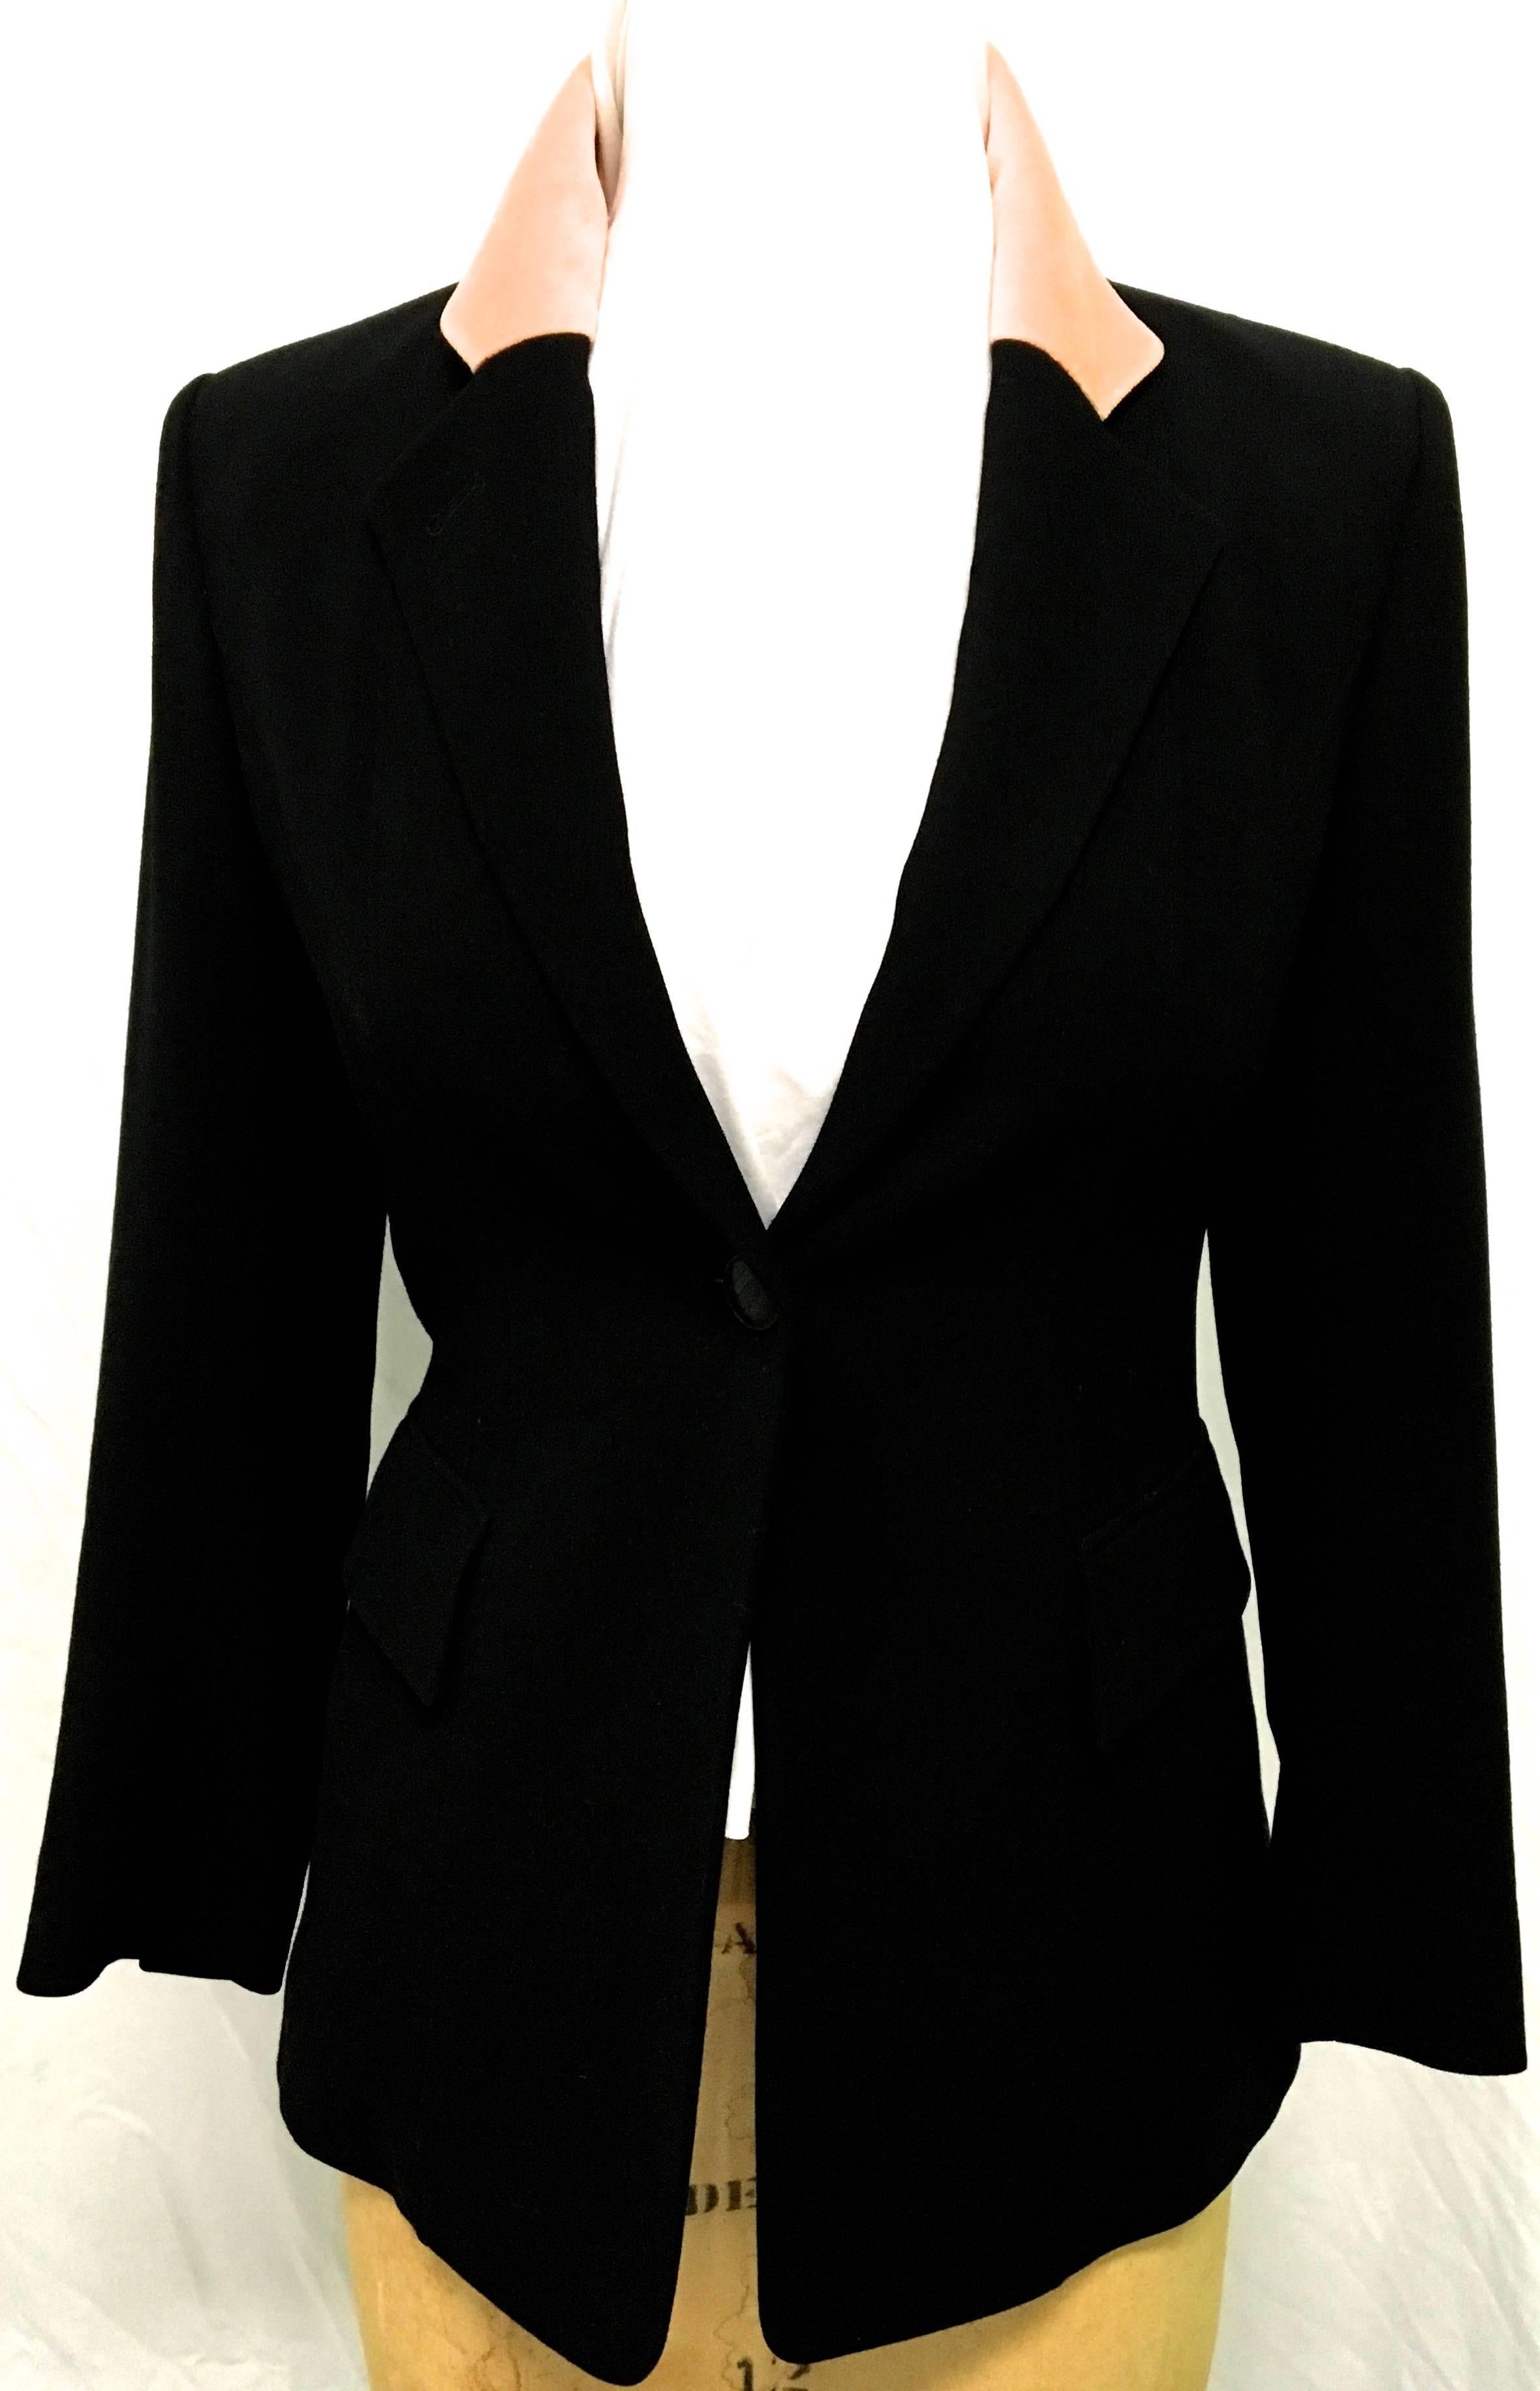 Presented here is a gorgeous women's blazer by Hermes Paris from the 1980's. This fabulous blazer is comprised of black soft wool on the exterior and is lined in acetate along the interior. There is a beautiful peach colored collar that adds a nice